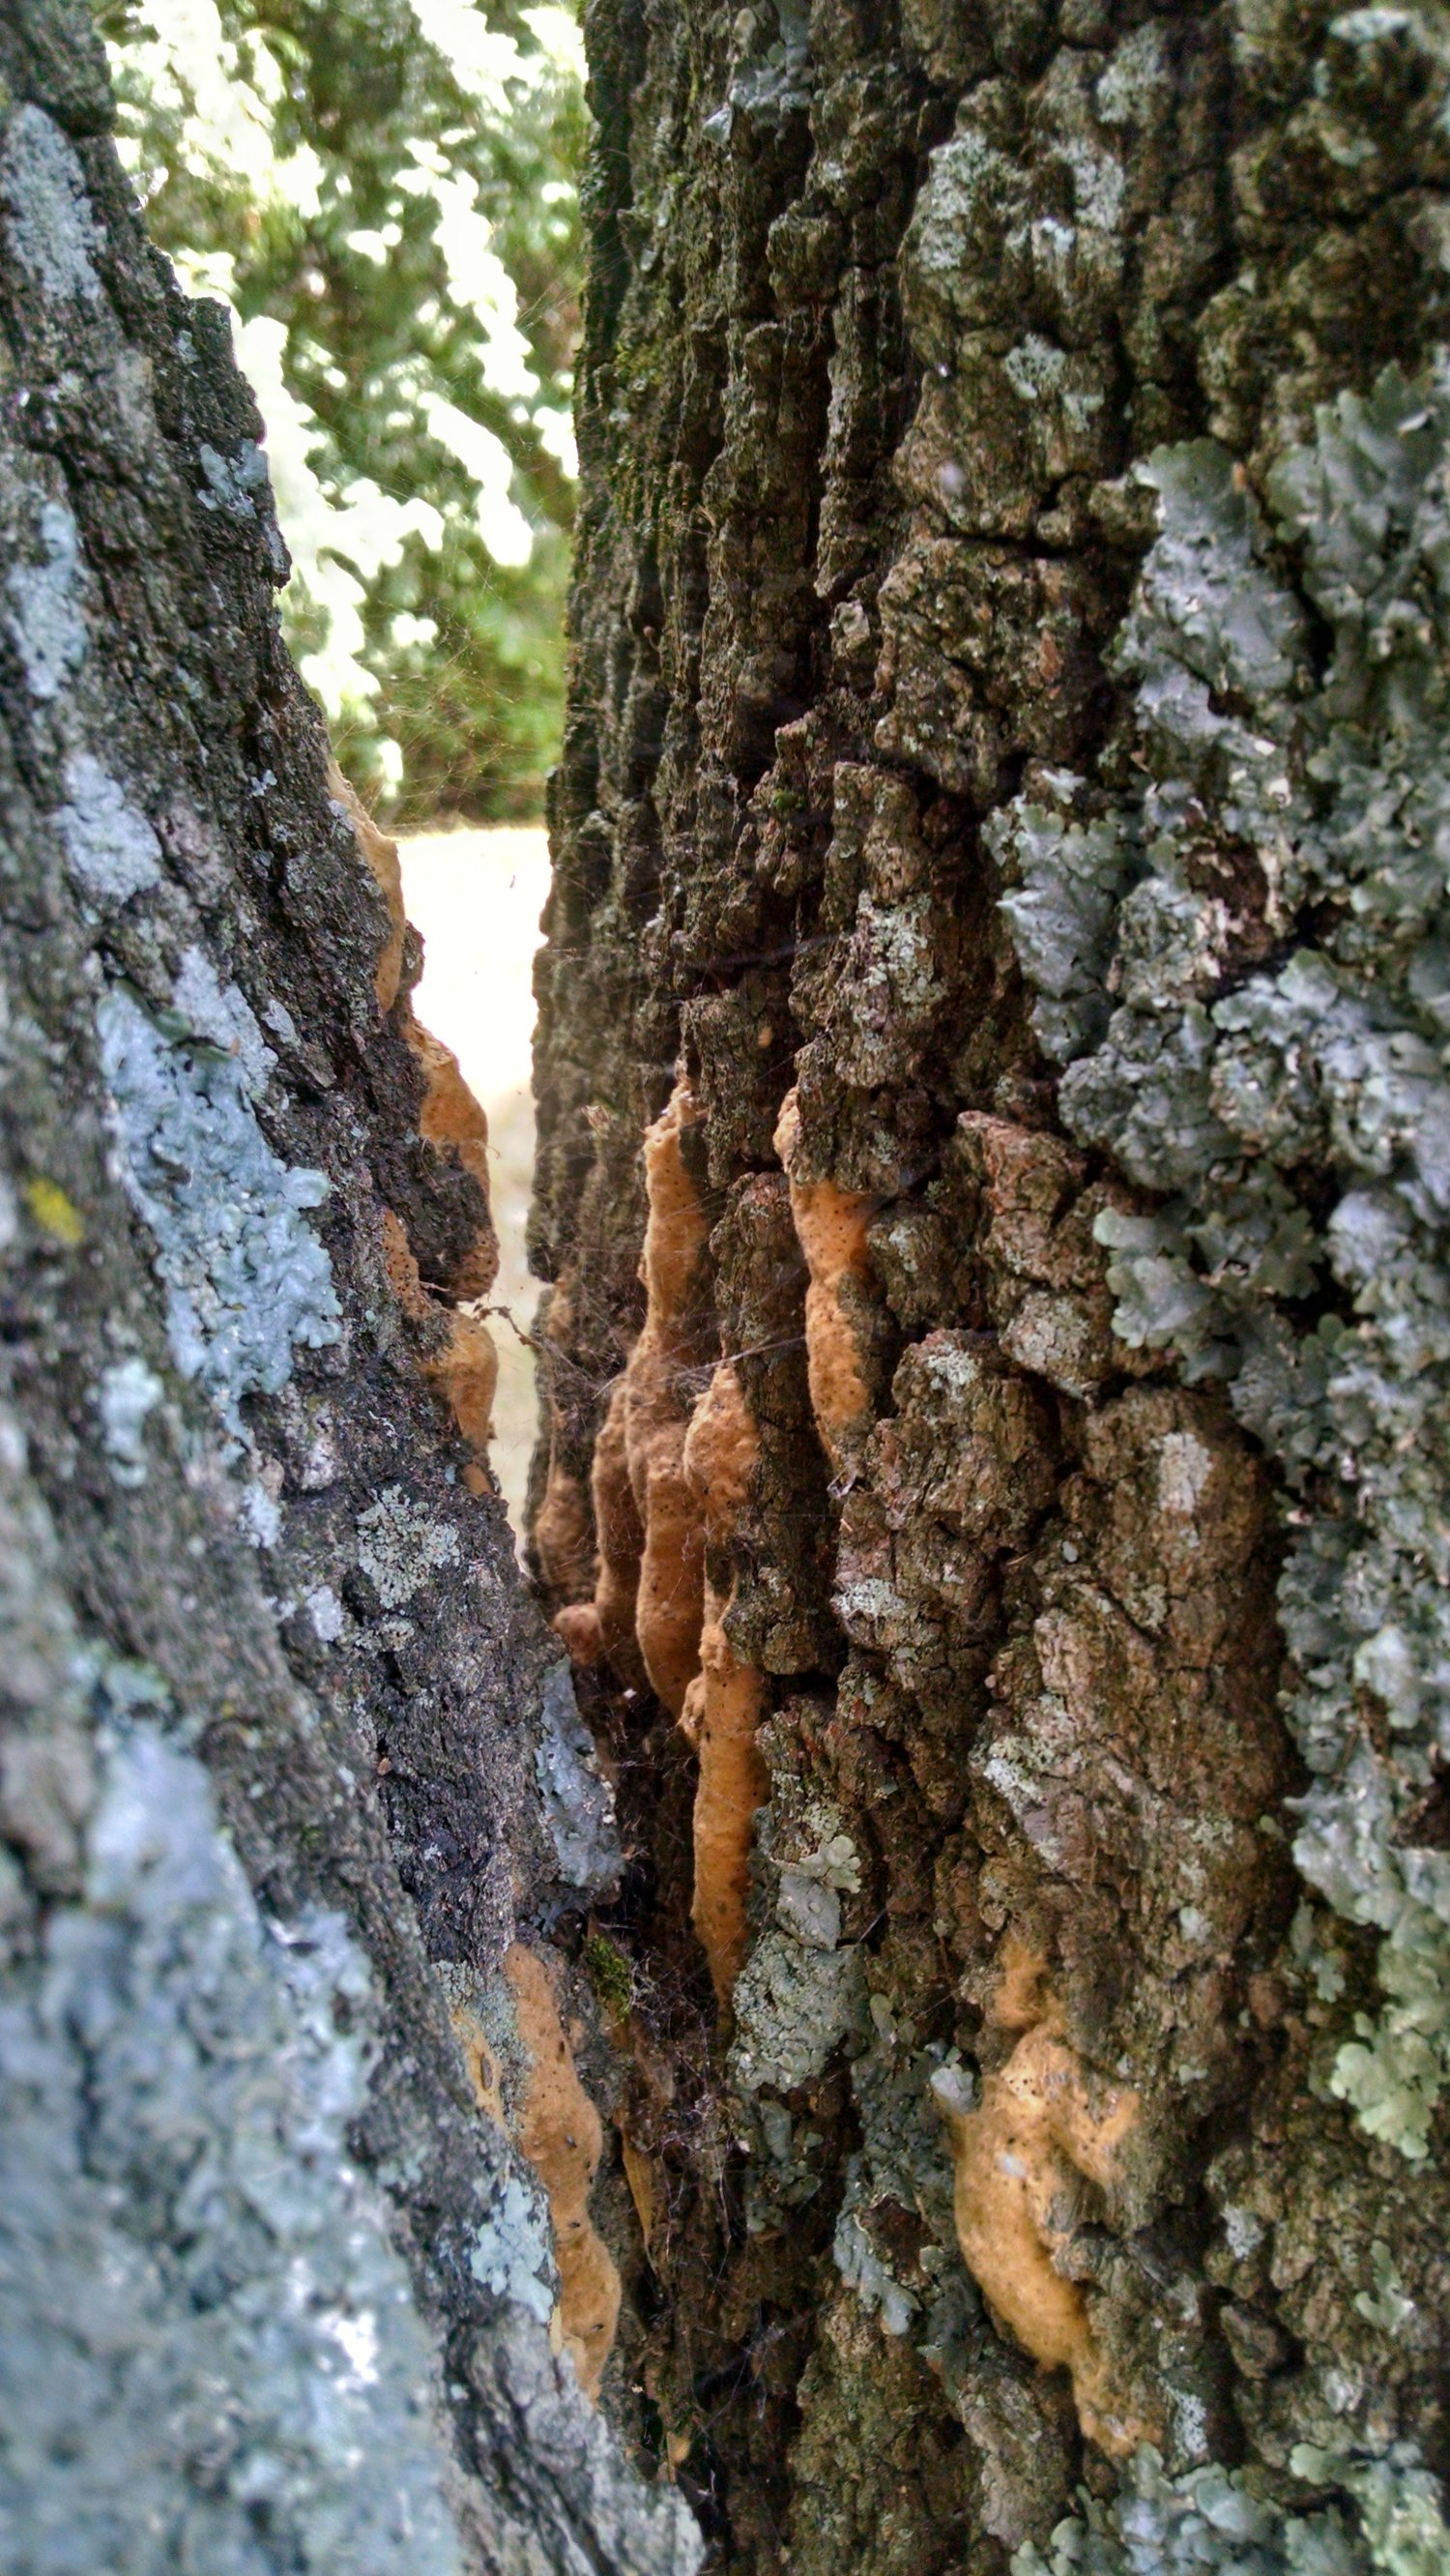 Gypsy moth overwinters in tan-colored, irregular shaped egg masses laid on the trunks of trees and contain 50 to 1500 individual eggs (K. Bernard).